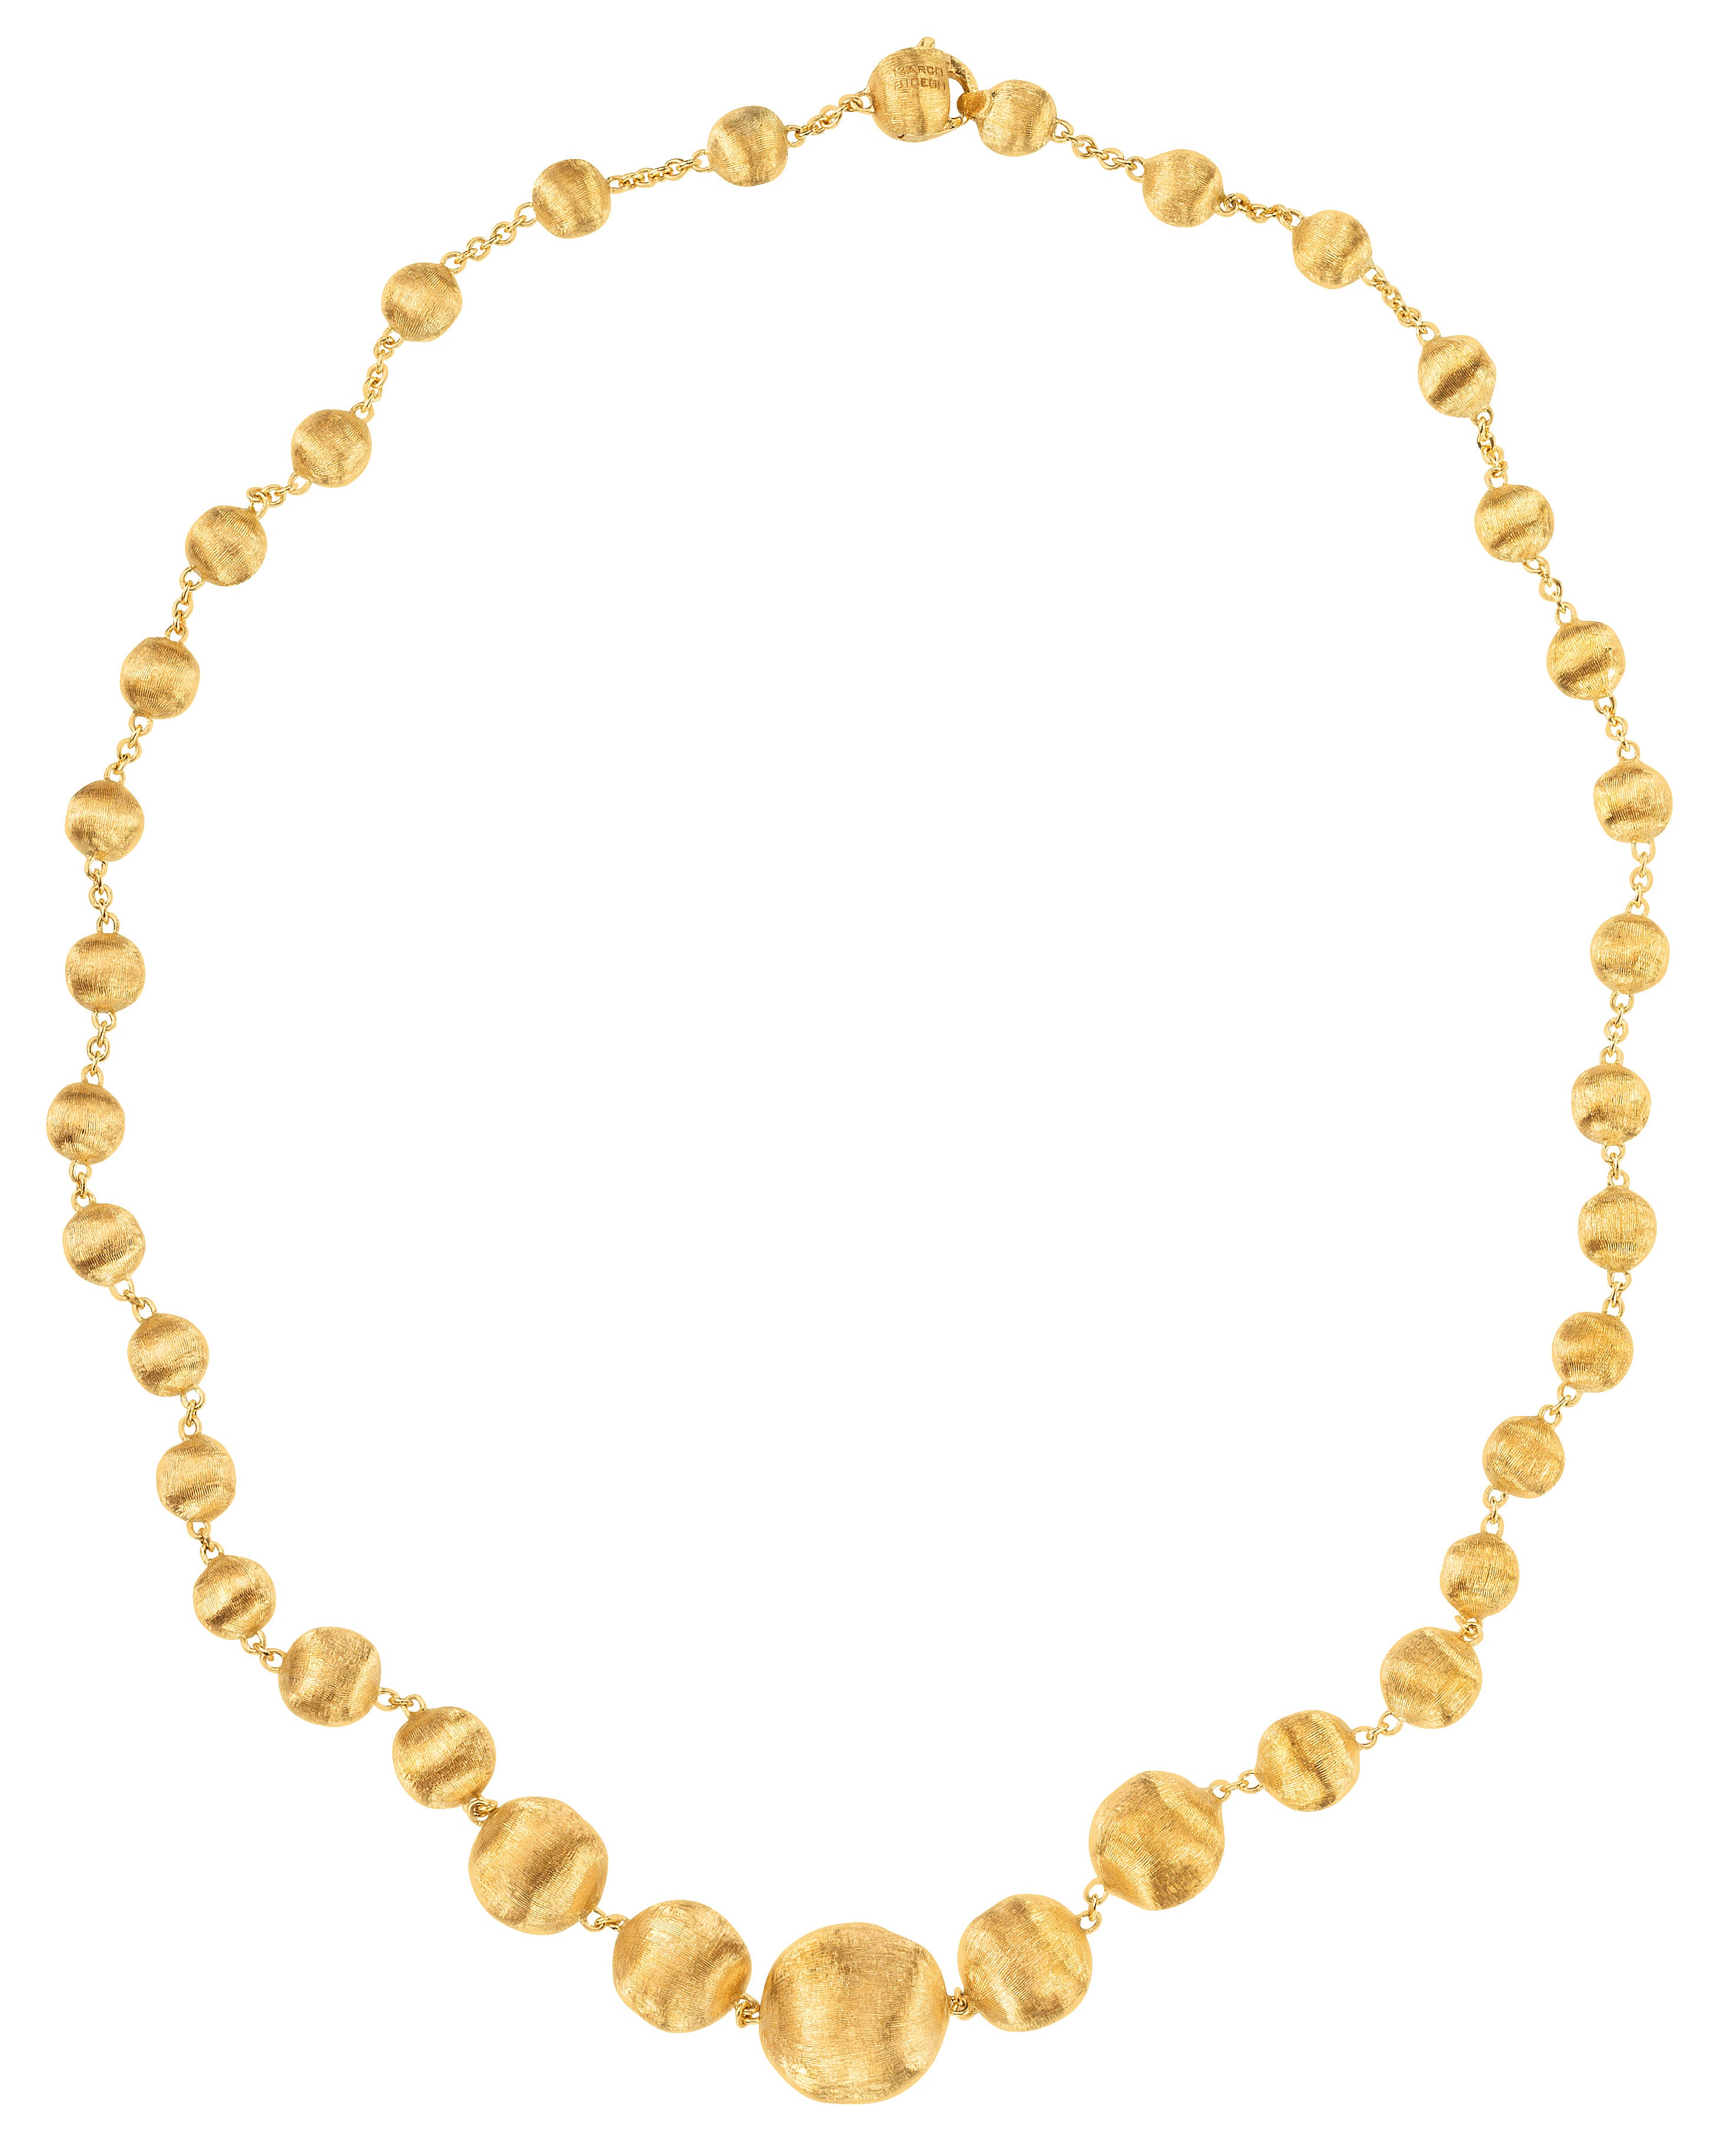 MARCO BICEGO 18K YELLOW GOLD 16" INCH LONG BEADED NECKLACE FROM THE AFRICA COLLECTION